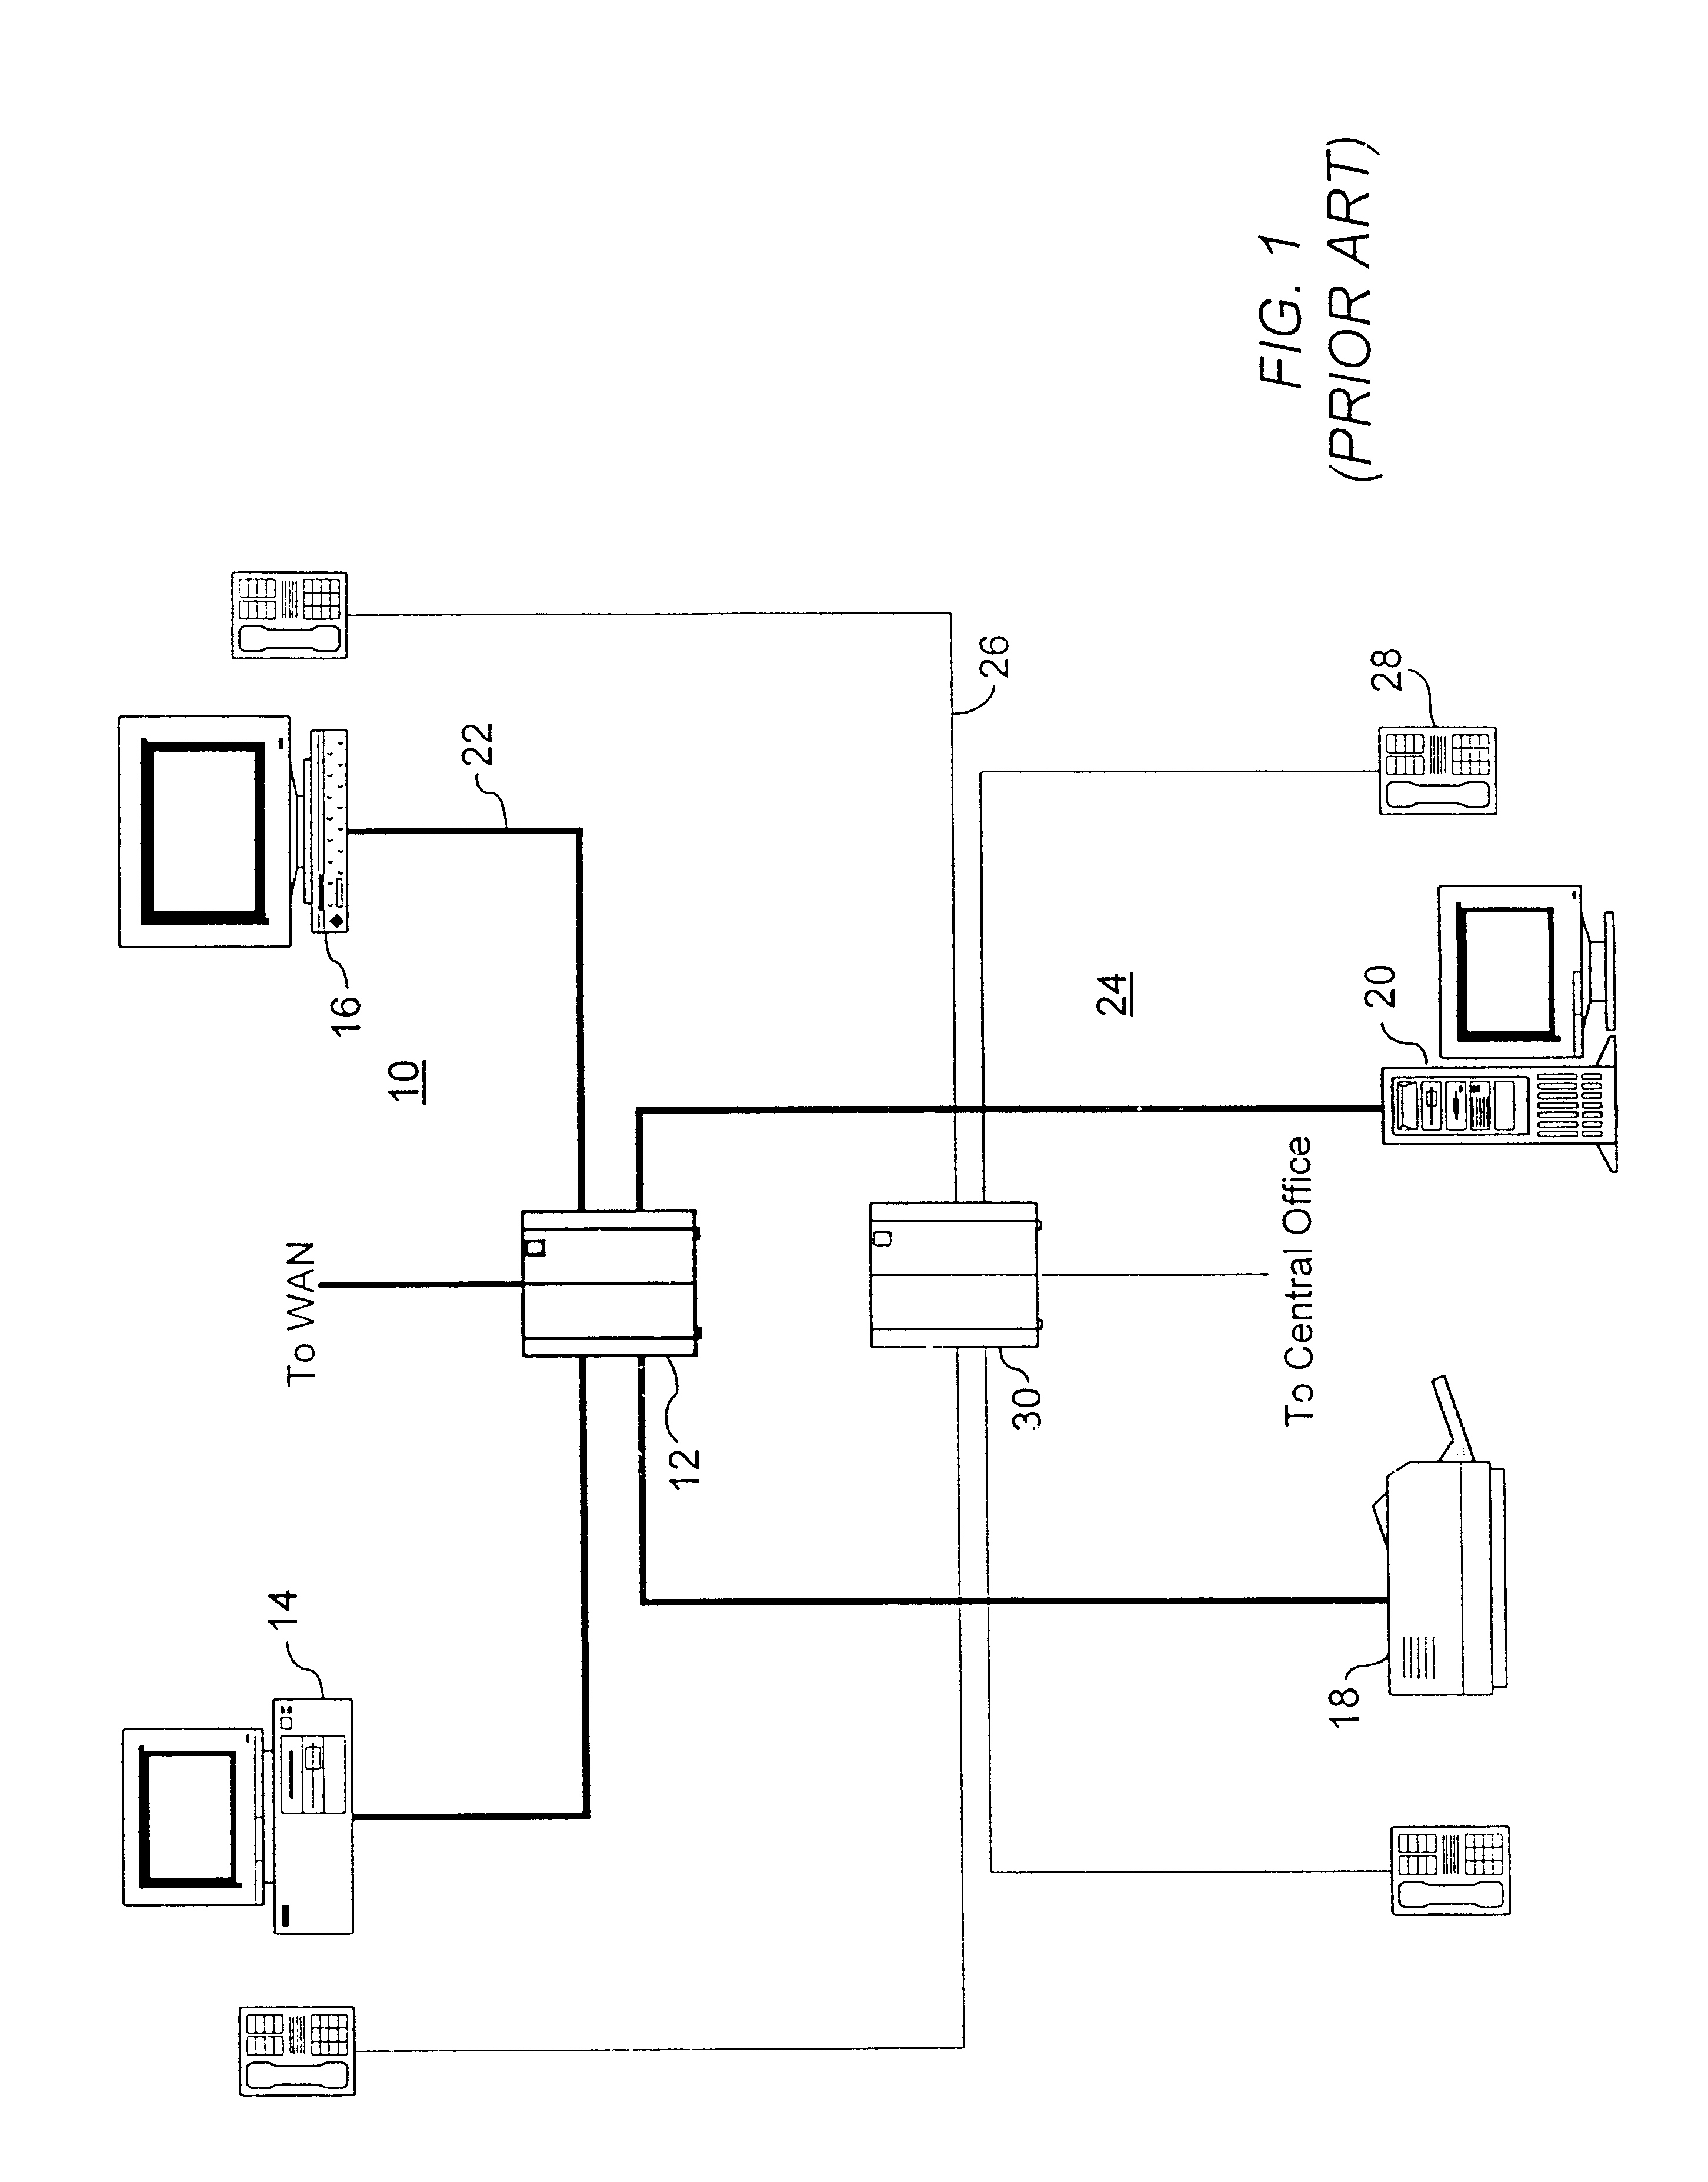 Method for initializing and allocating bandwidth in a permanent virtual connection for the transmission and control of audio, video, and computer data over a single network fabric